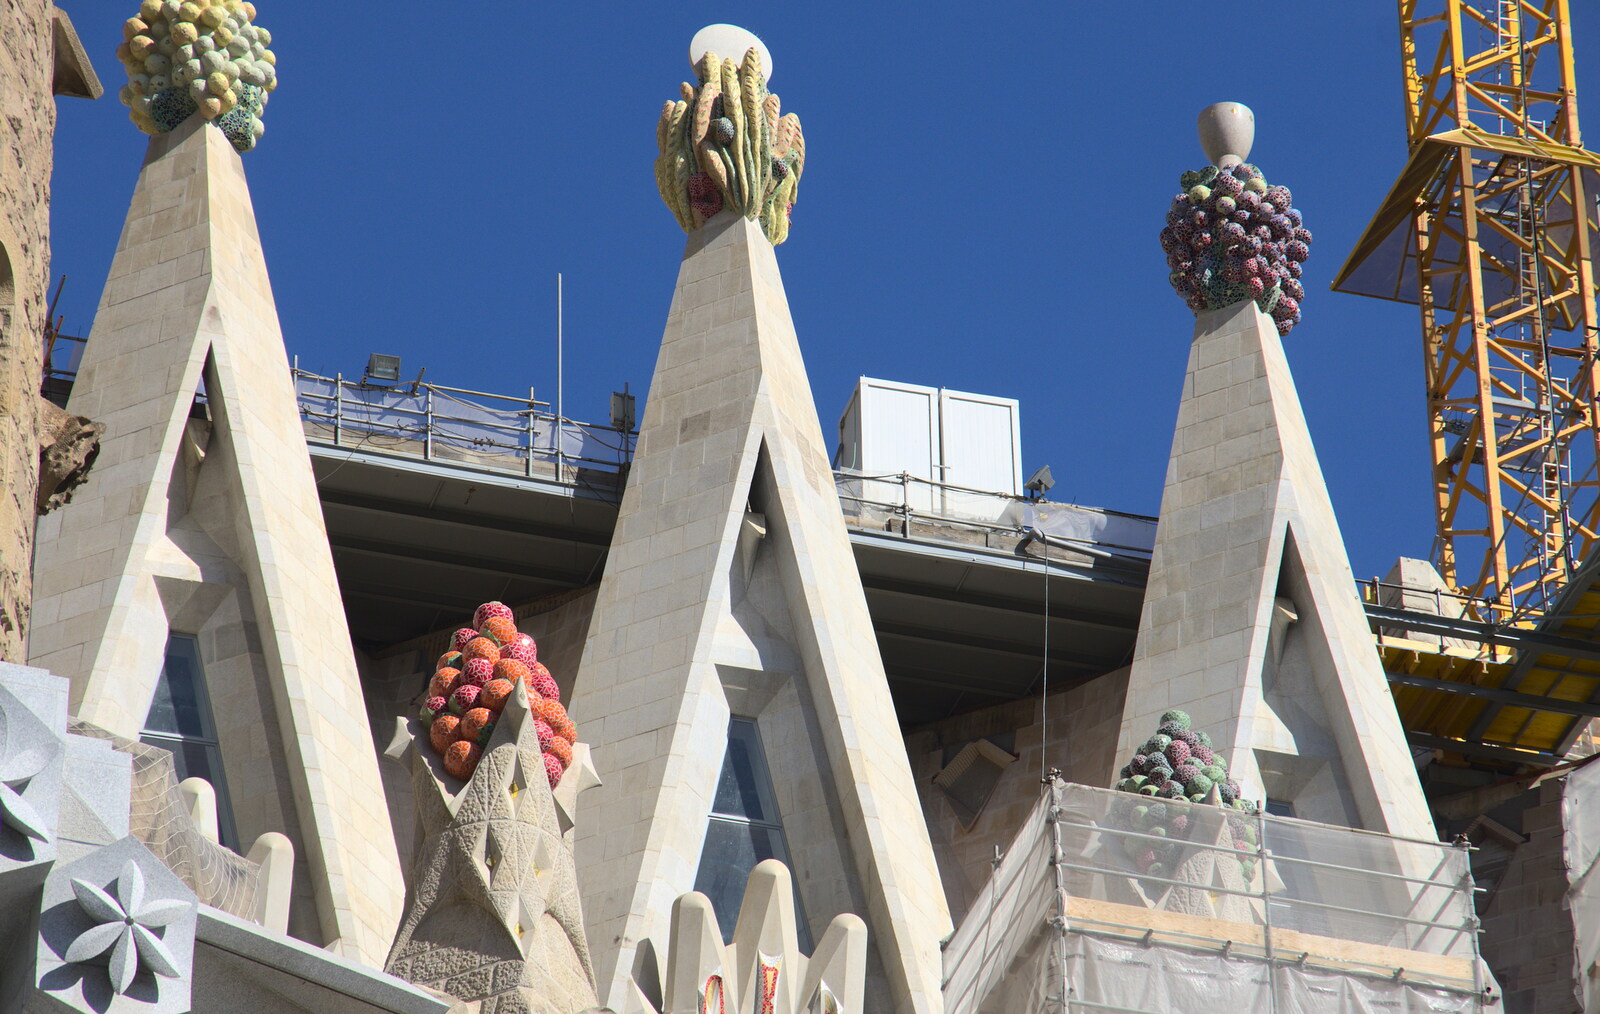 Architectural fruit from A Barcelona Bus Tour, Catalonia, Spain - 25th October 2017